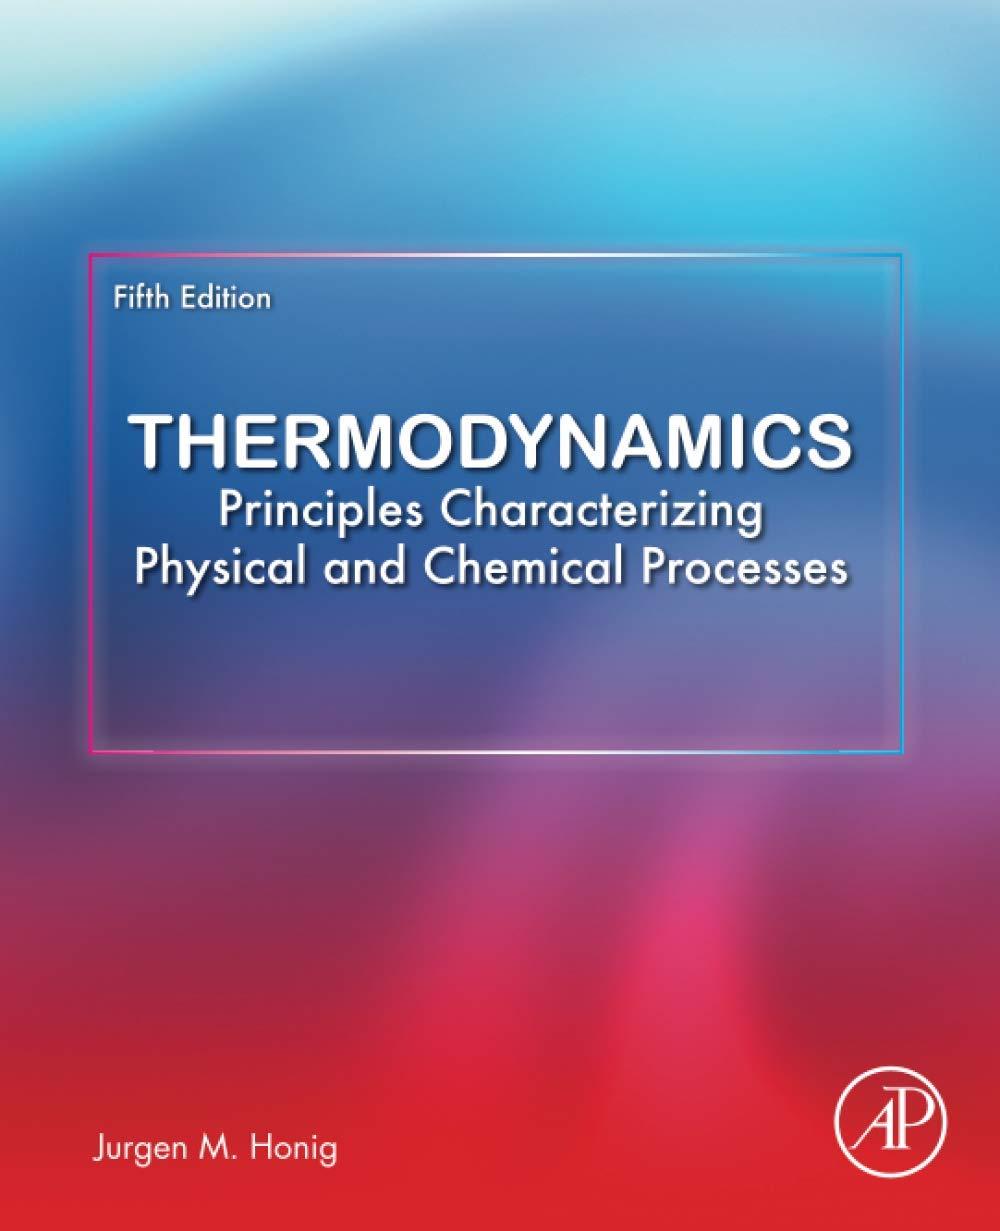 thermodynamics principles characterizing physical and chemical processes 5th edition jurgen m. honig